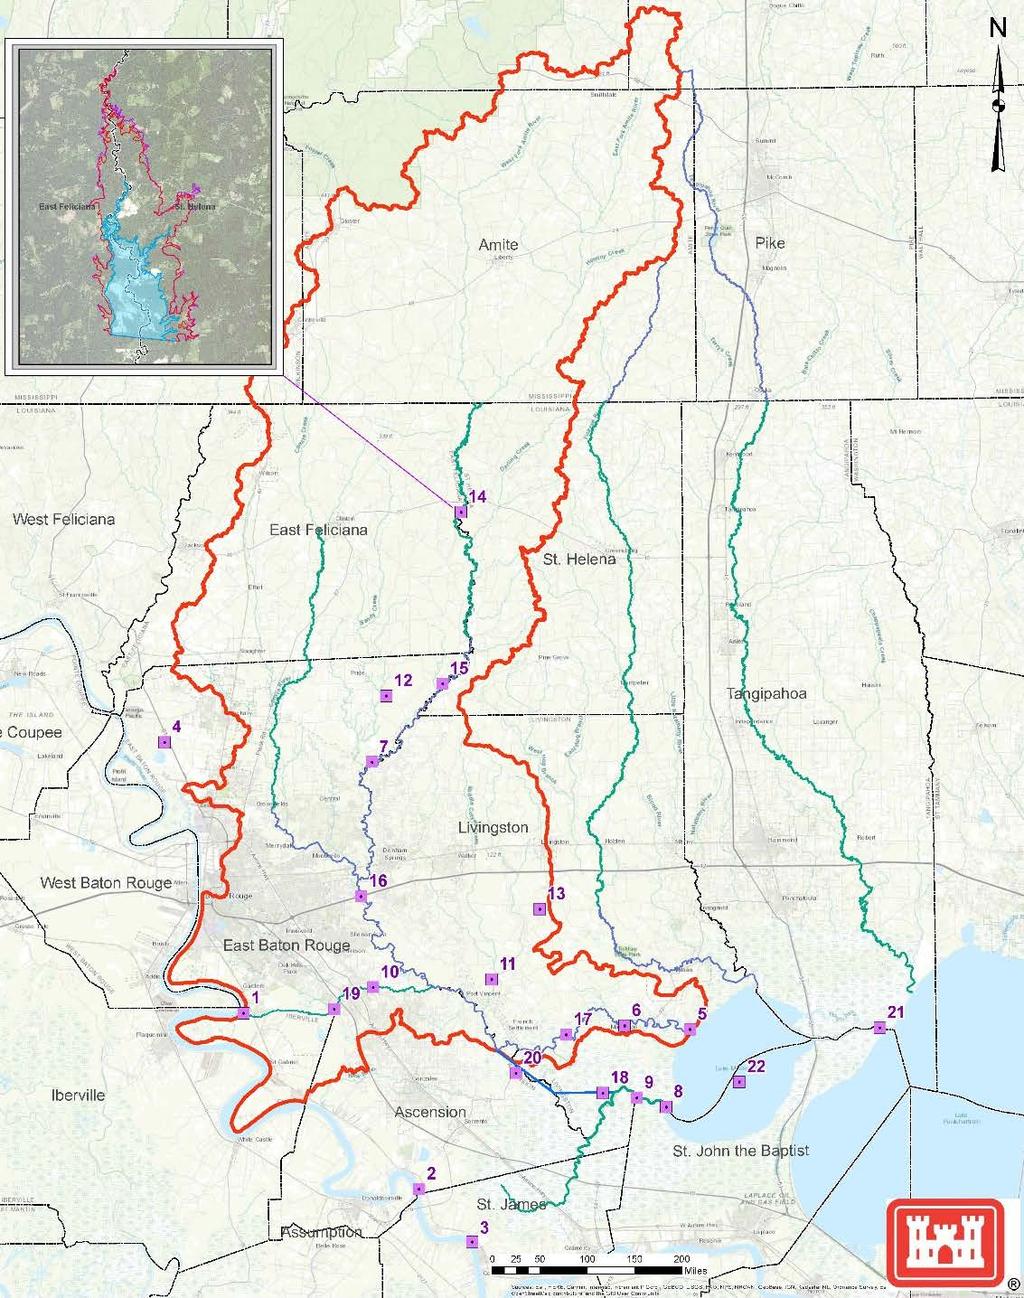 Dredging of Upper Amite River 21 Closures at Tidal Passes 8 Dredging of Outfall @ Blind River 22 Dredging of Lake Marpas 9 Dredging of Lower Blind River NAFlood warning/monitoring systems 10 Dredging